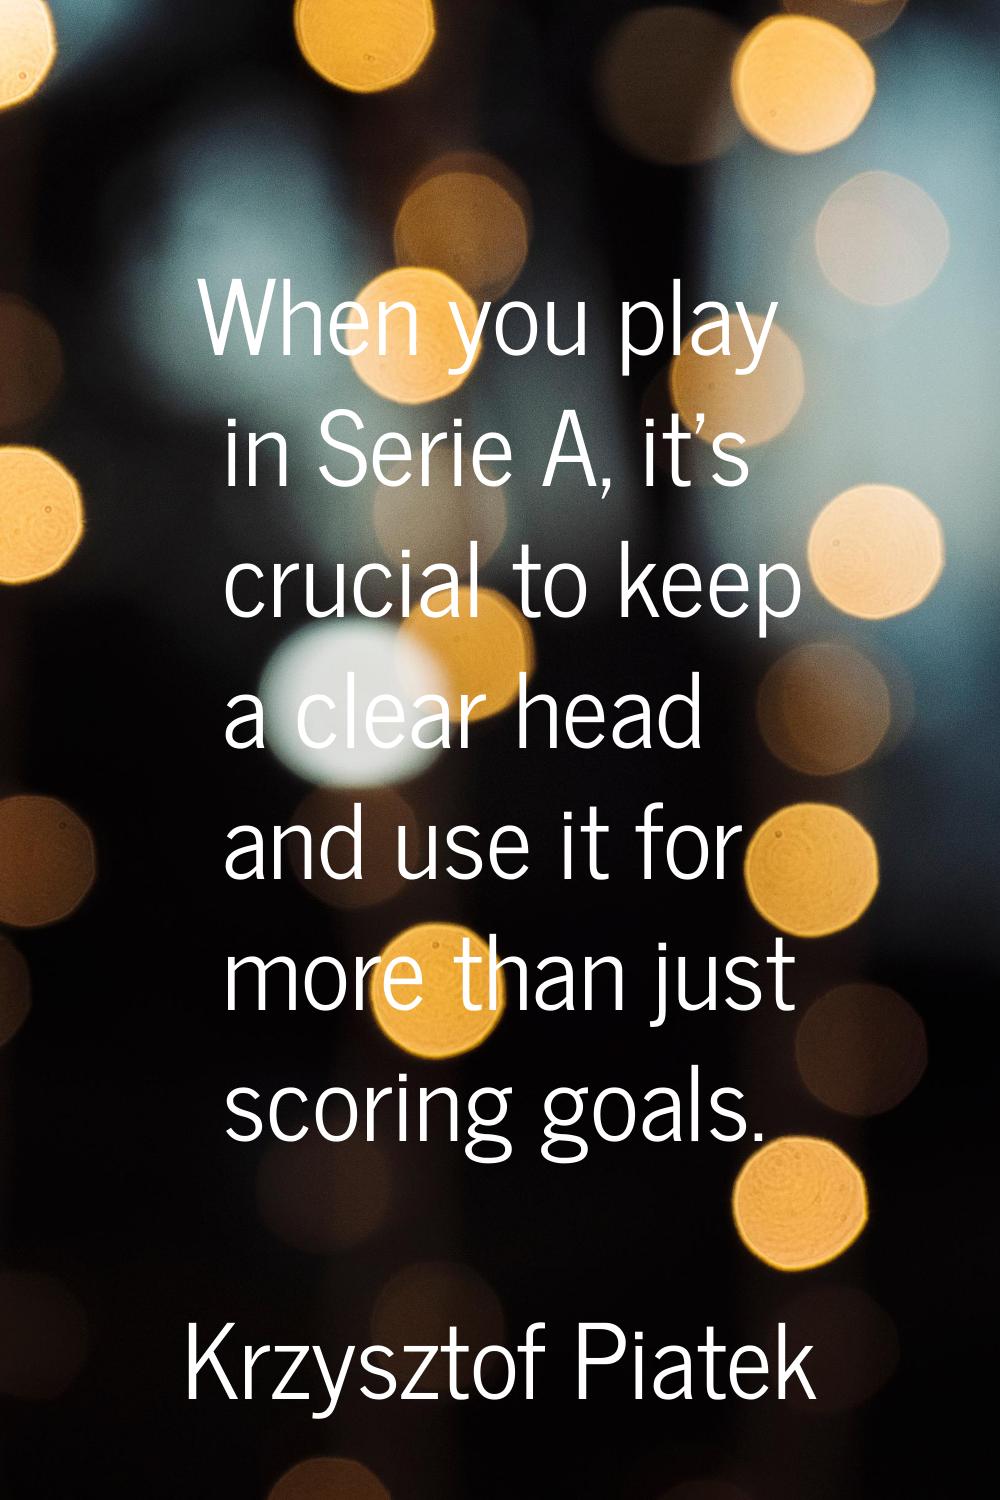 When you play in Serie A, it's crucial to keep a clear head and use it for more than just scoring g